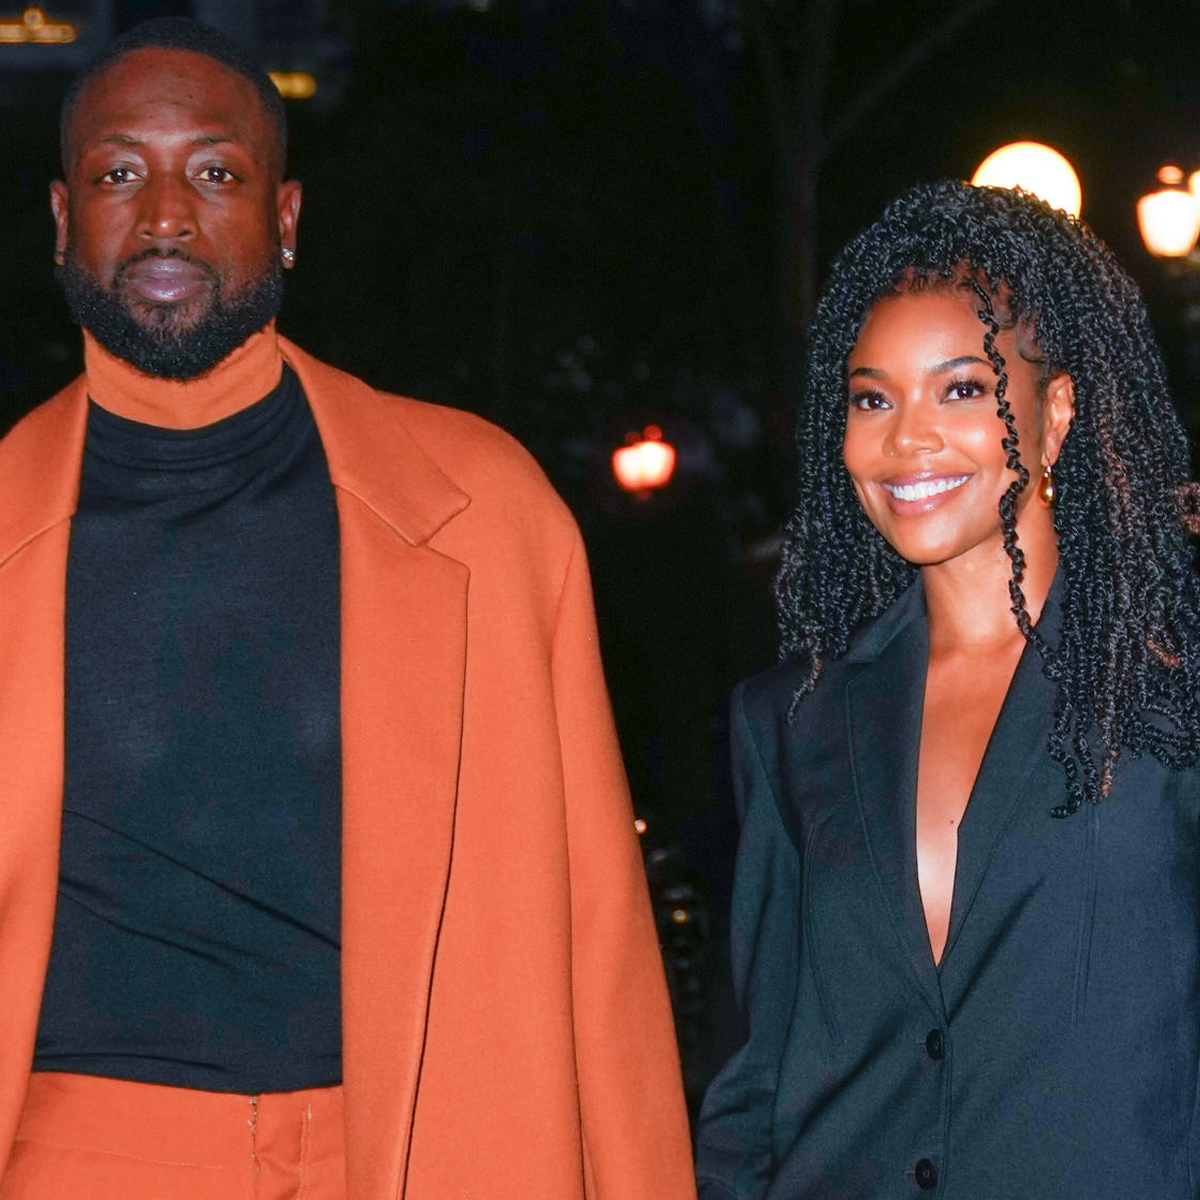 Dwyane Wade Breaks Silence On Going 50/50 With Gabrielle Union